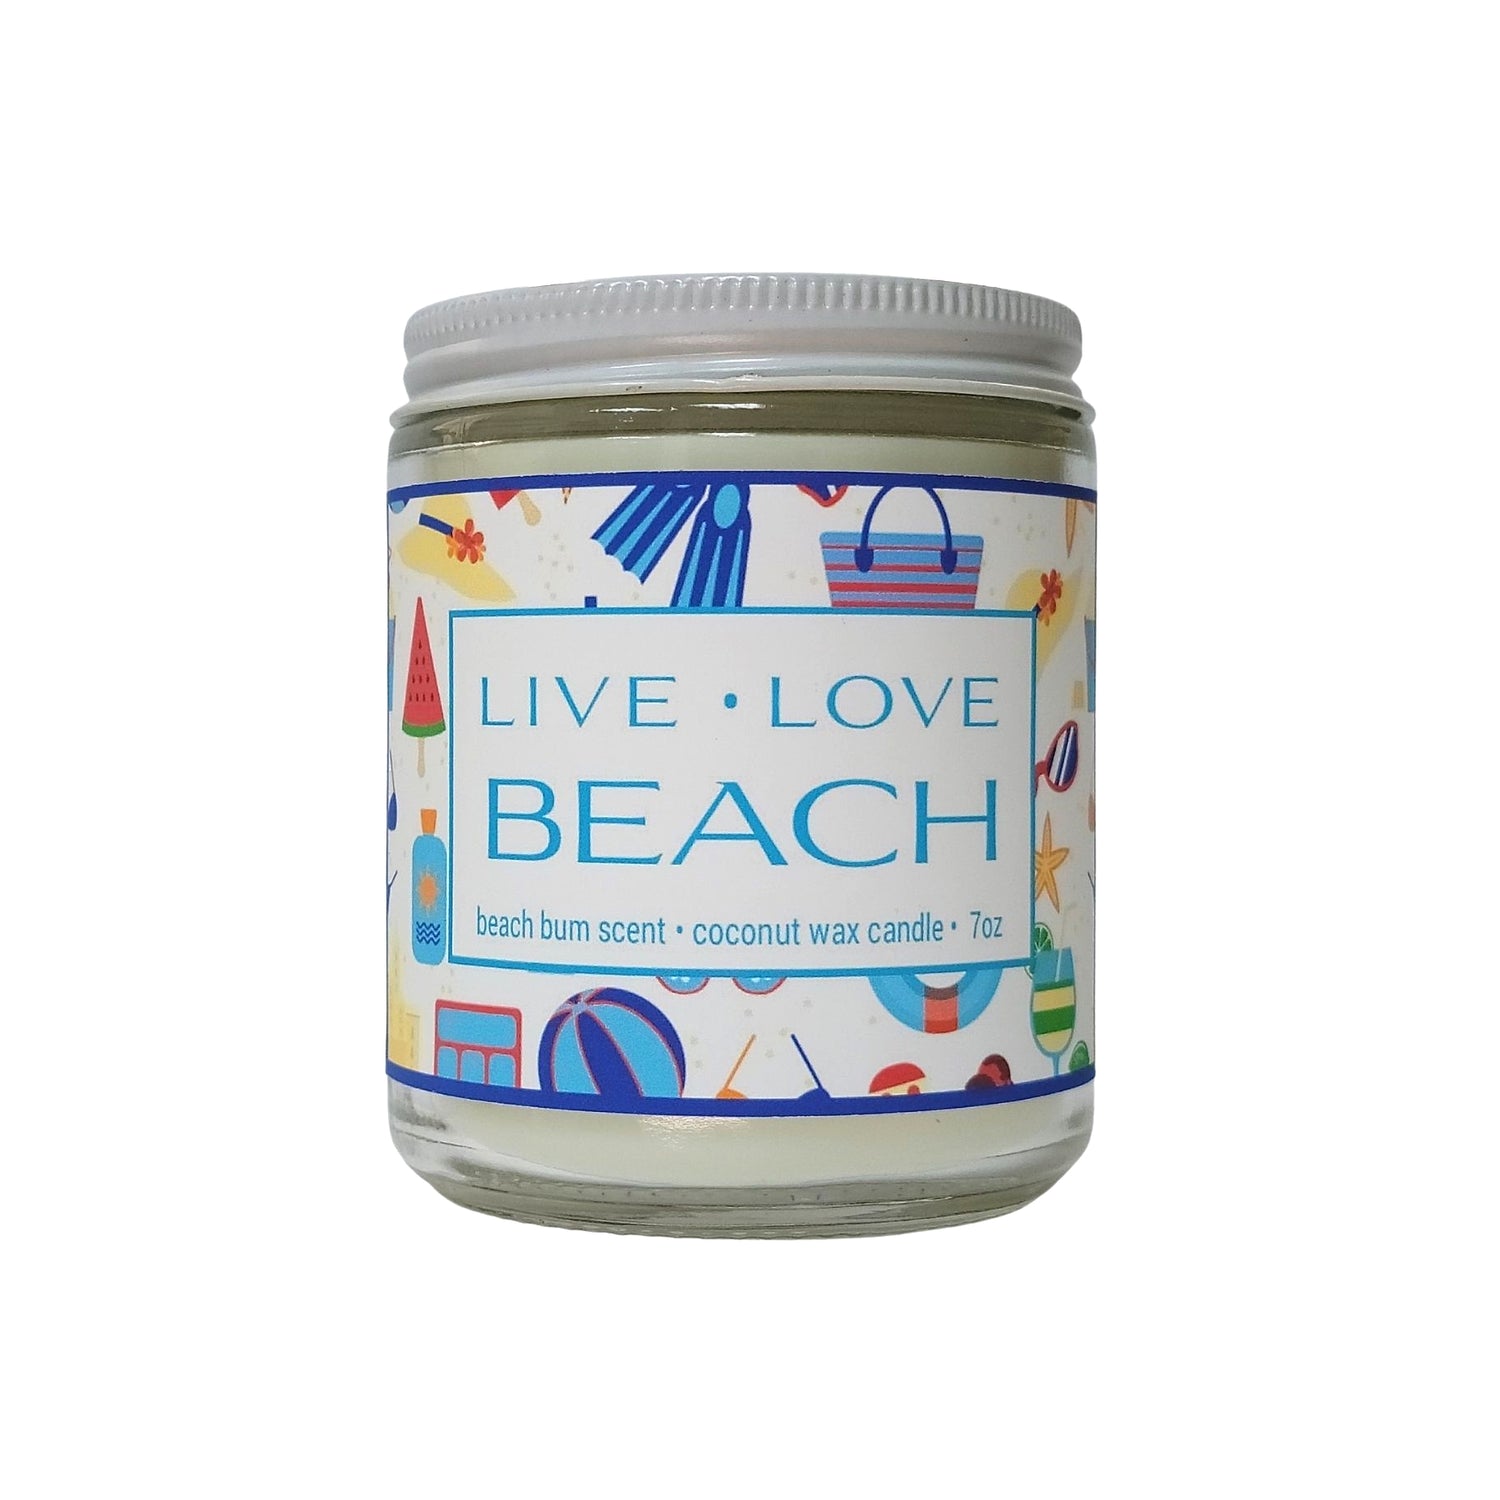 LIVE LOVE BEACH 7oz Candle made with coconut wax and scented with beach bun non-toxic fragrance 